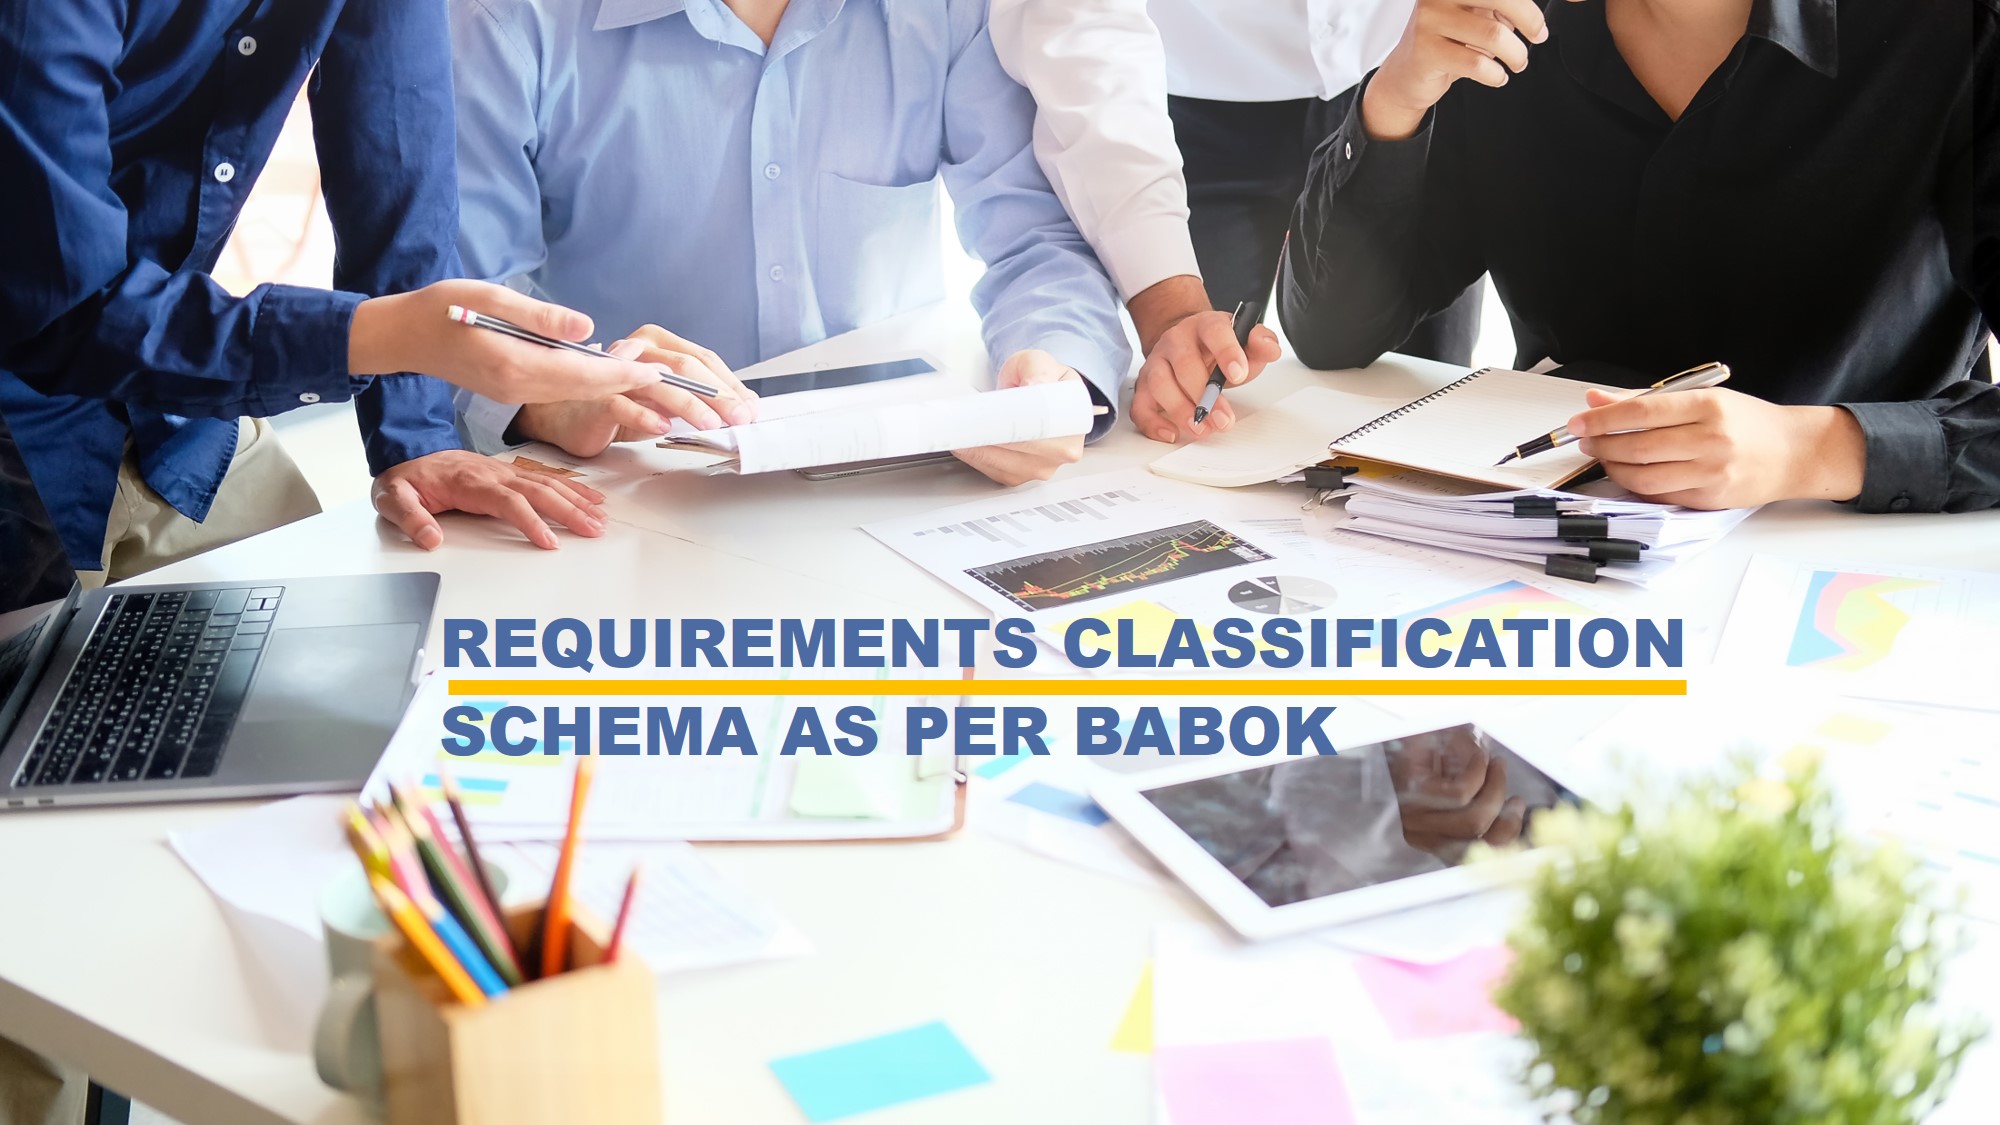 Types of Requirements | BABOK classification Schema